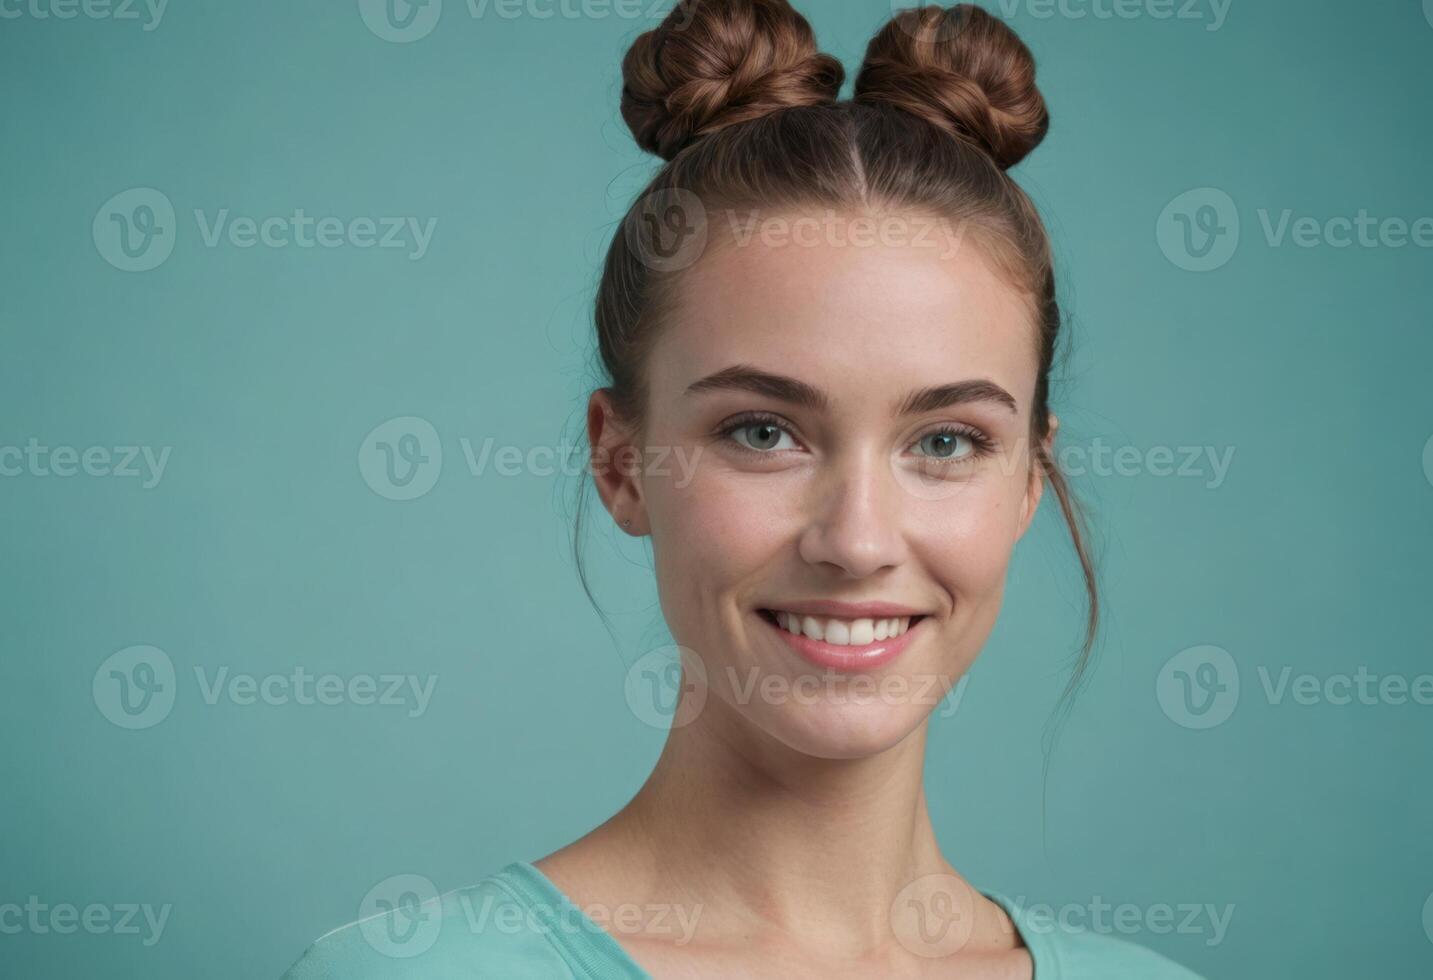 AI Generated Fit woman with hair in double buns, sporting a cheerful expression. Her active wear and hairstyle suggest a playful yet focused lifestyle. photo